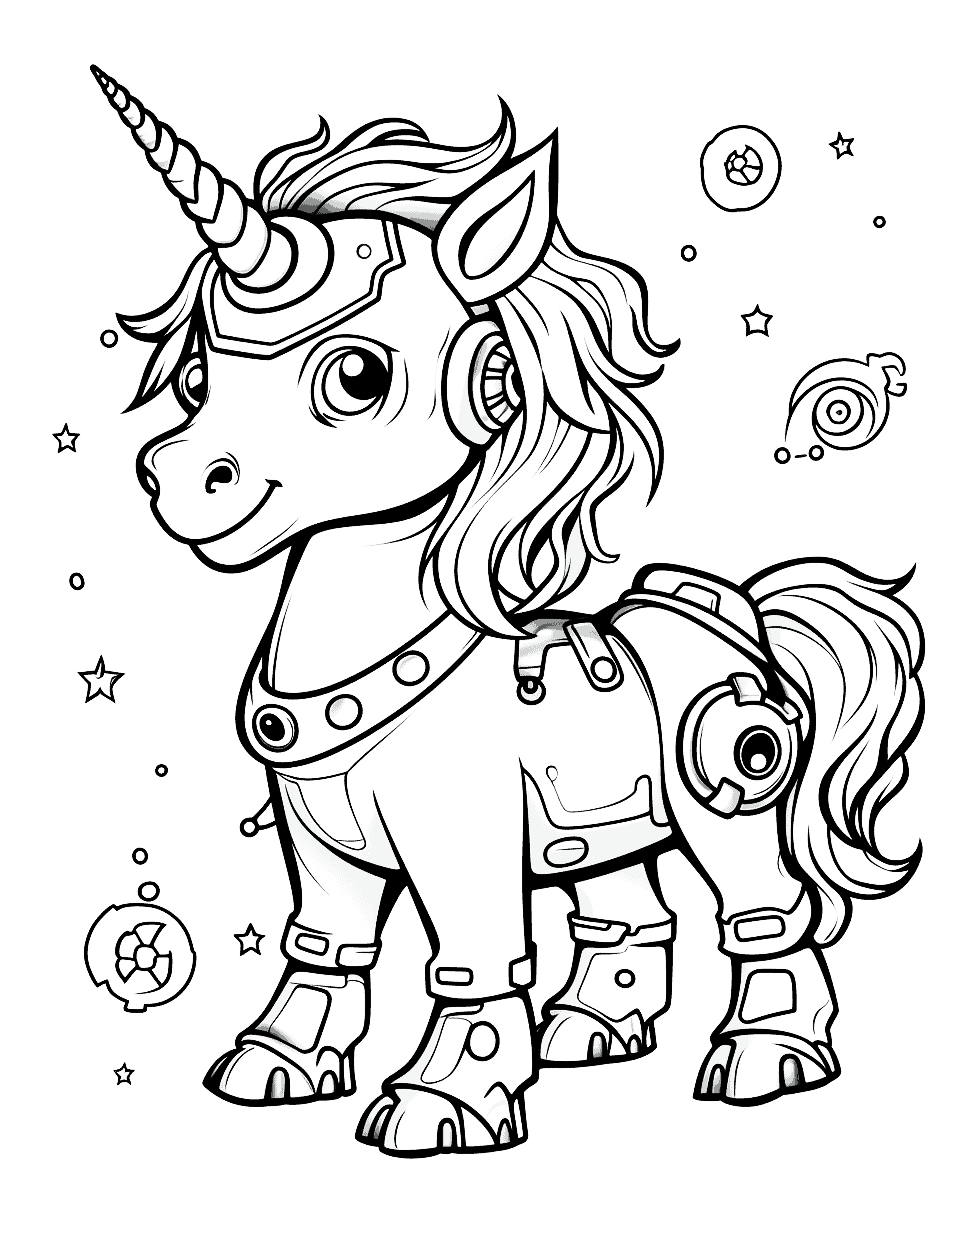 Robot Unicorn Coloring Page - A futuristic scene featuring a robot unicorn, complete with gears and circuits.